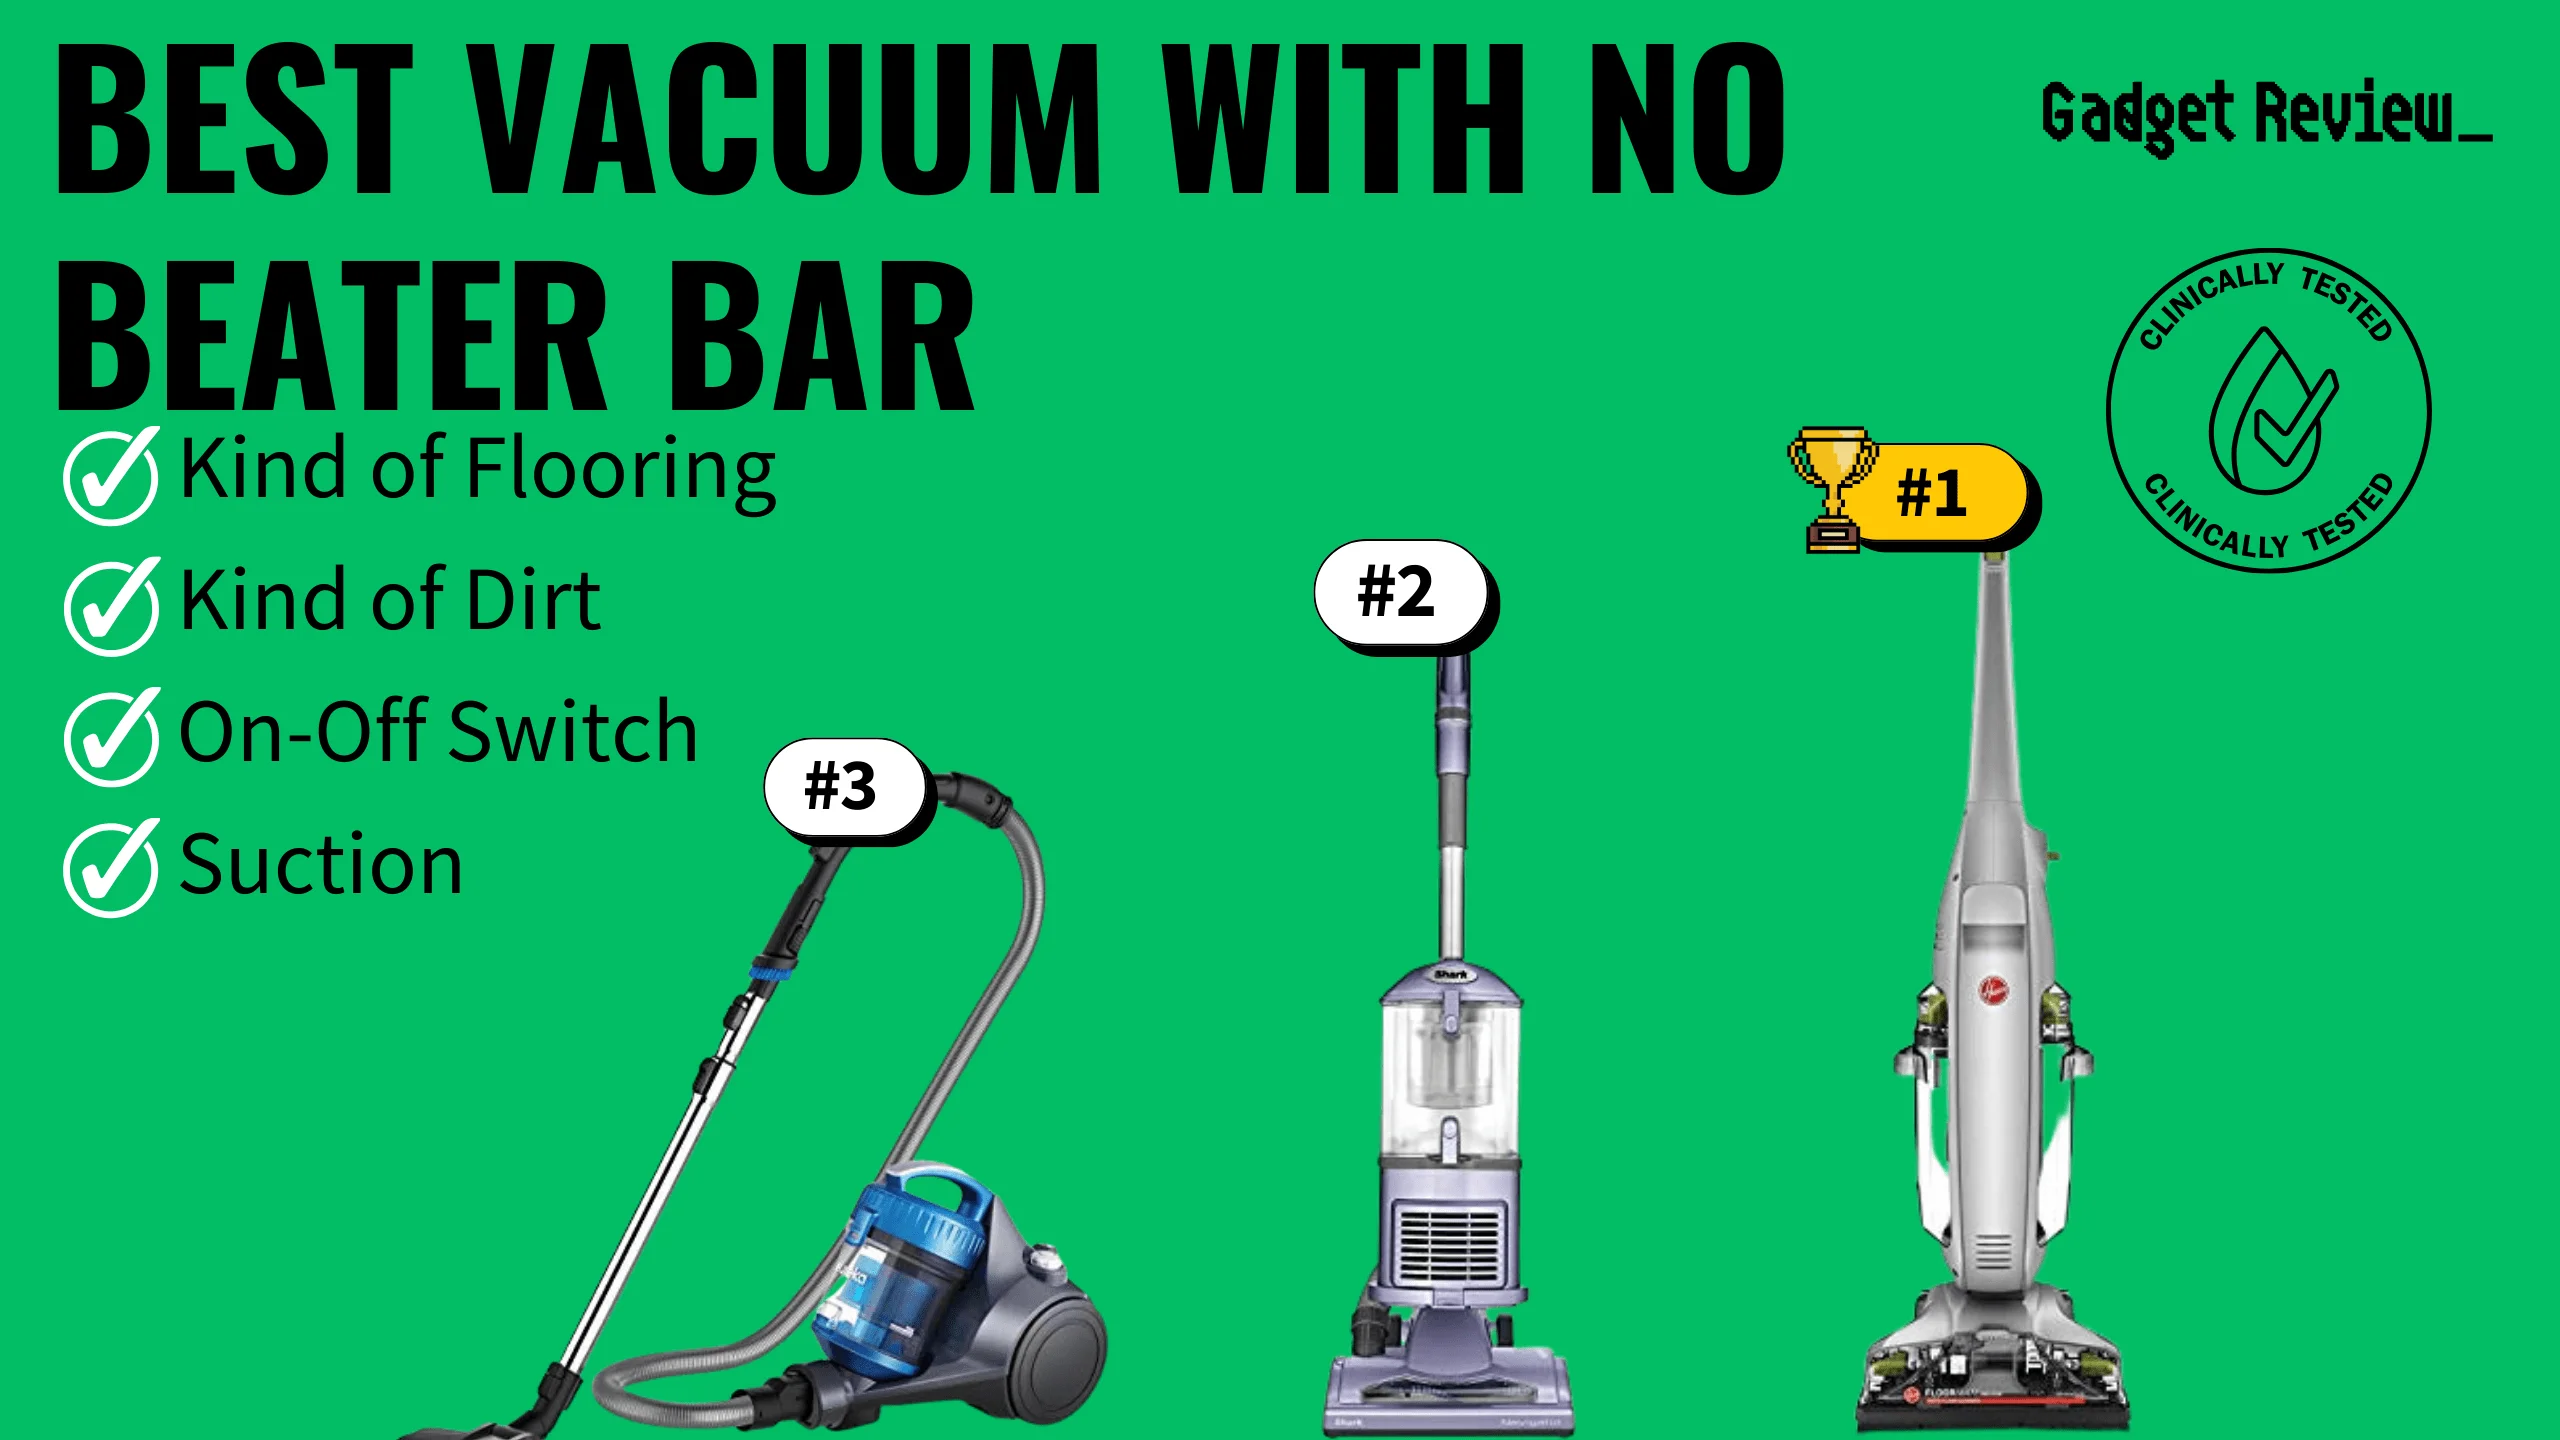 Best Vacuum with No Beater Bar